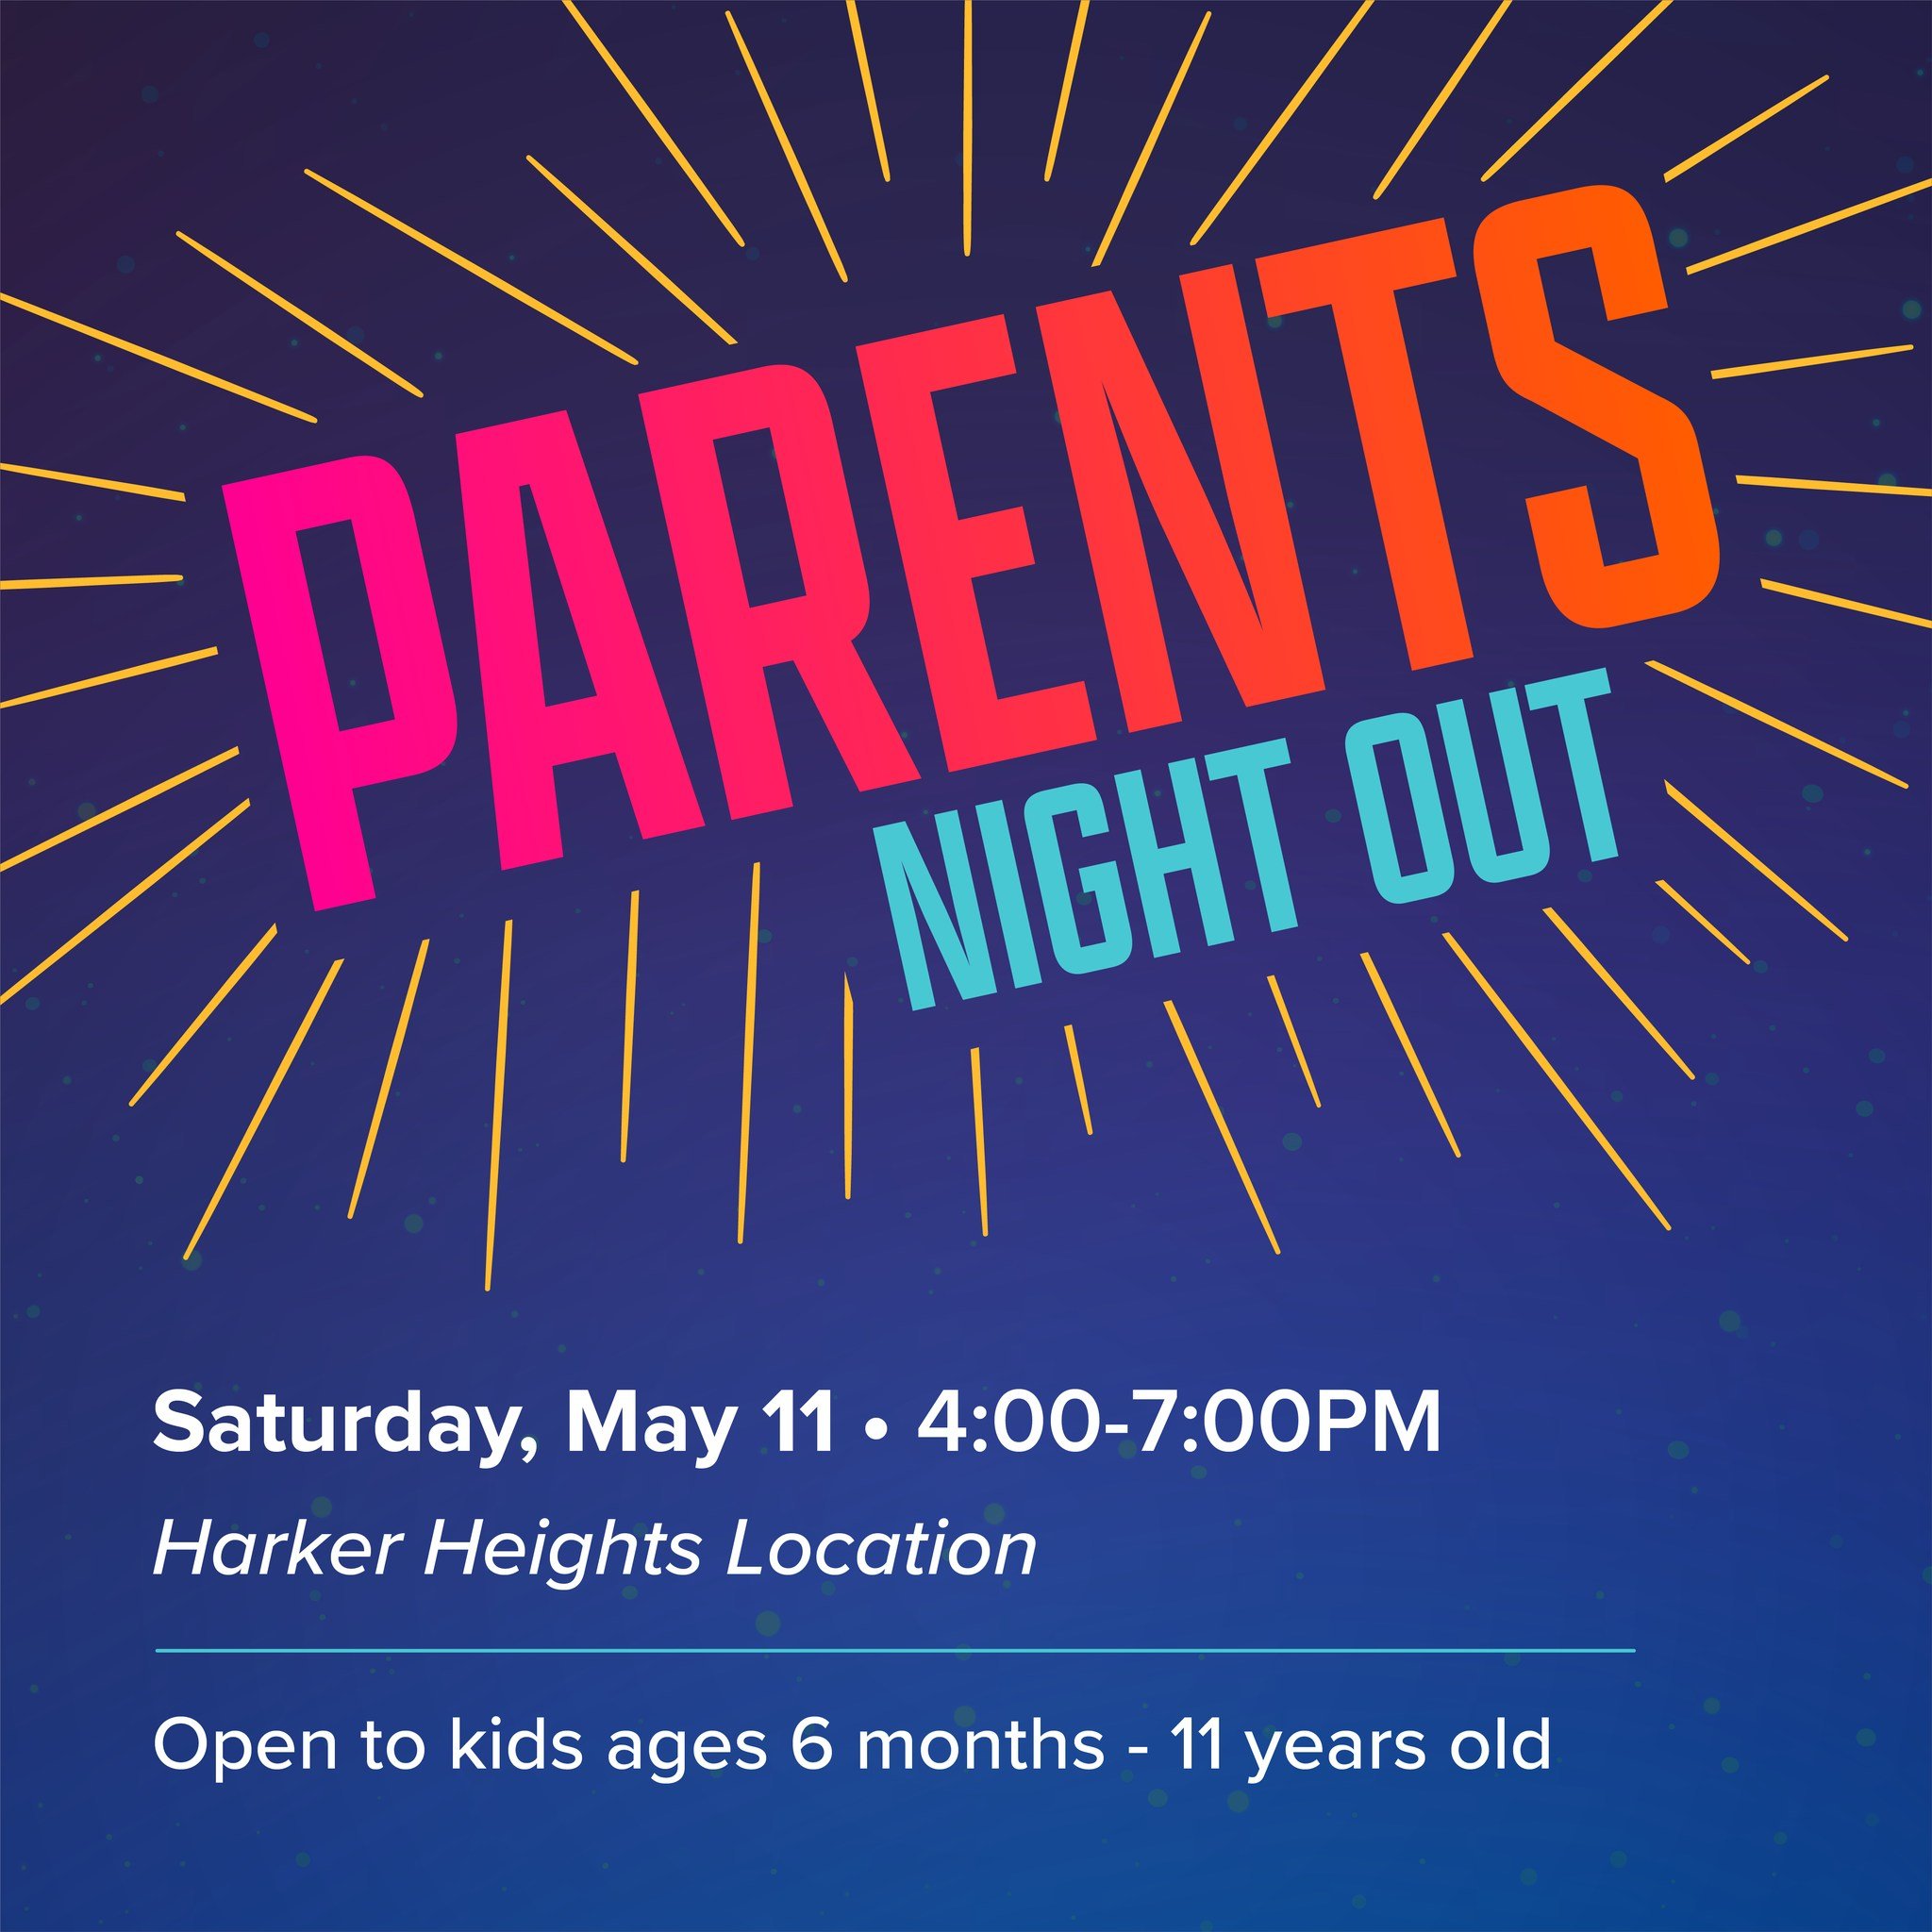 Parents! Our next night out for you is coming up NEXT Saturday. It's the perfect win-win as you get a few hours to have a great date... AND... your kiddos get to have a great time with us! Finalize your plans and register today at vintage.church/even